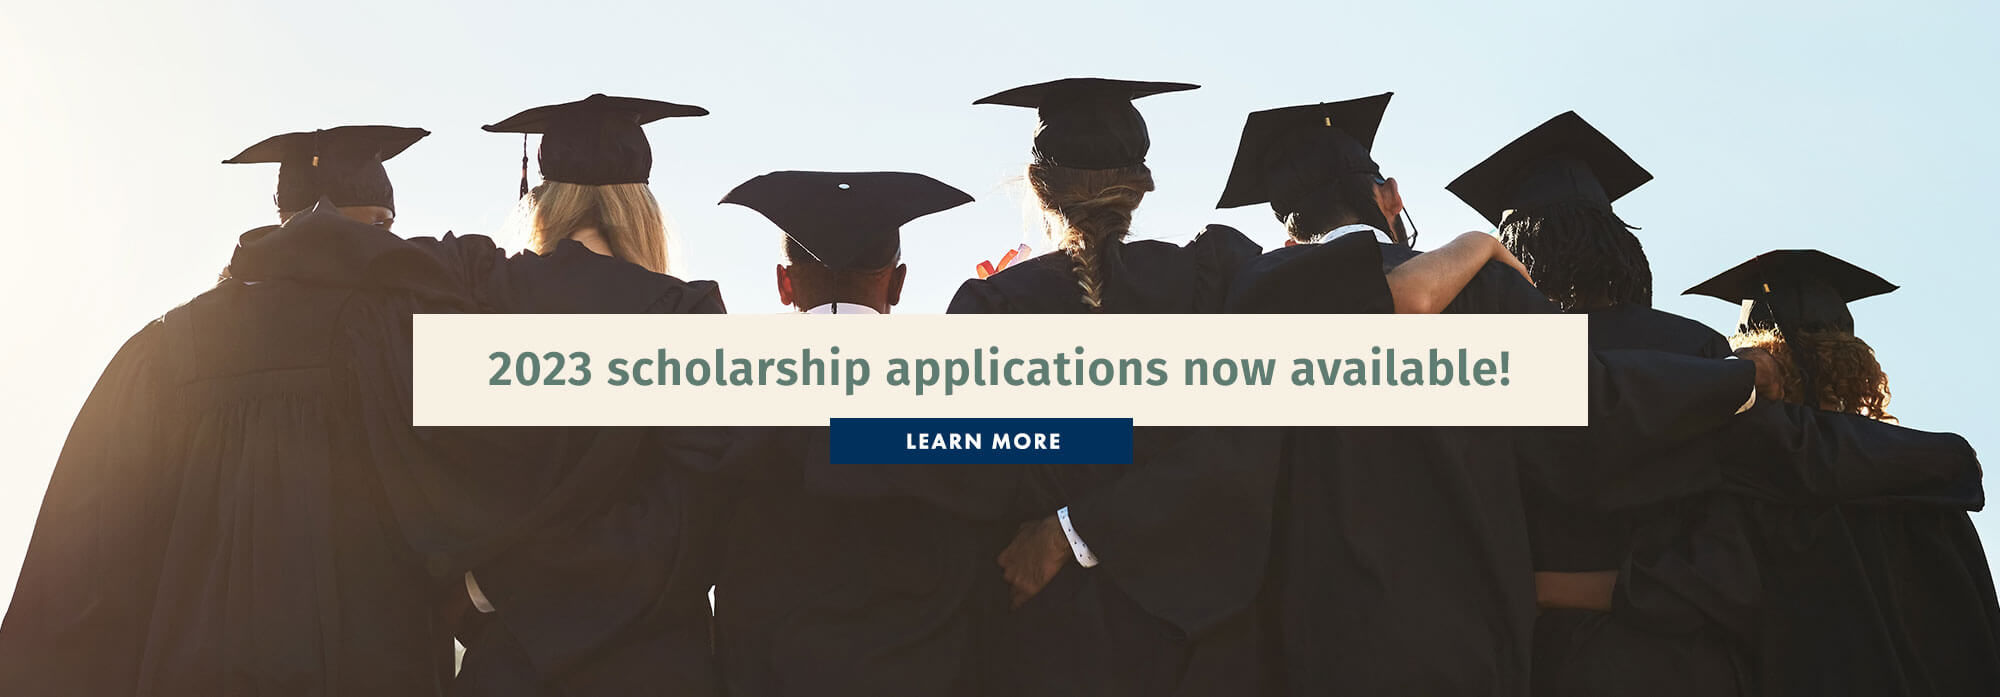 2023 scholarship applications now available!